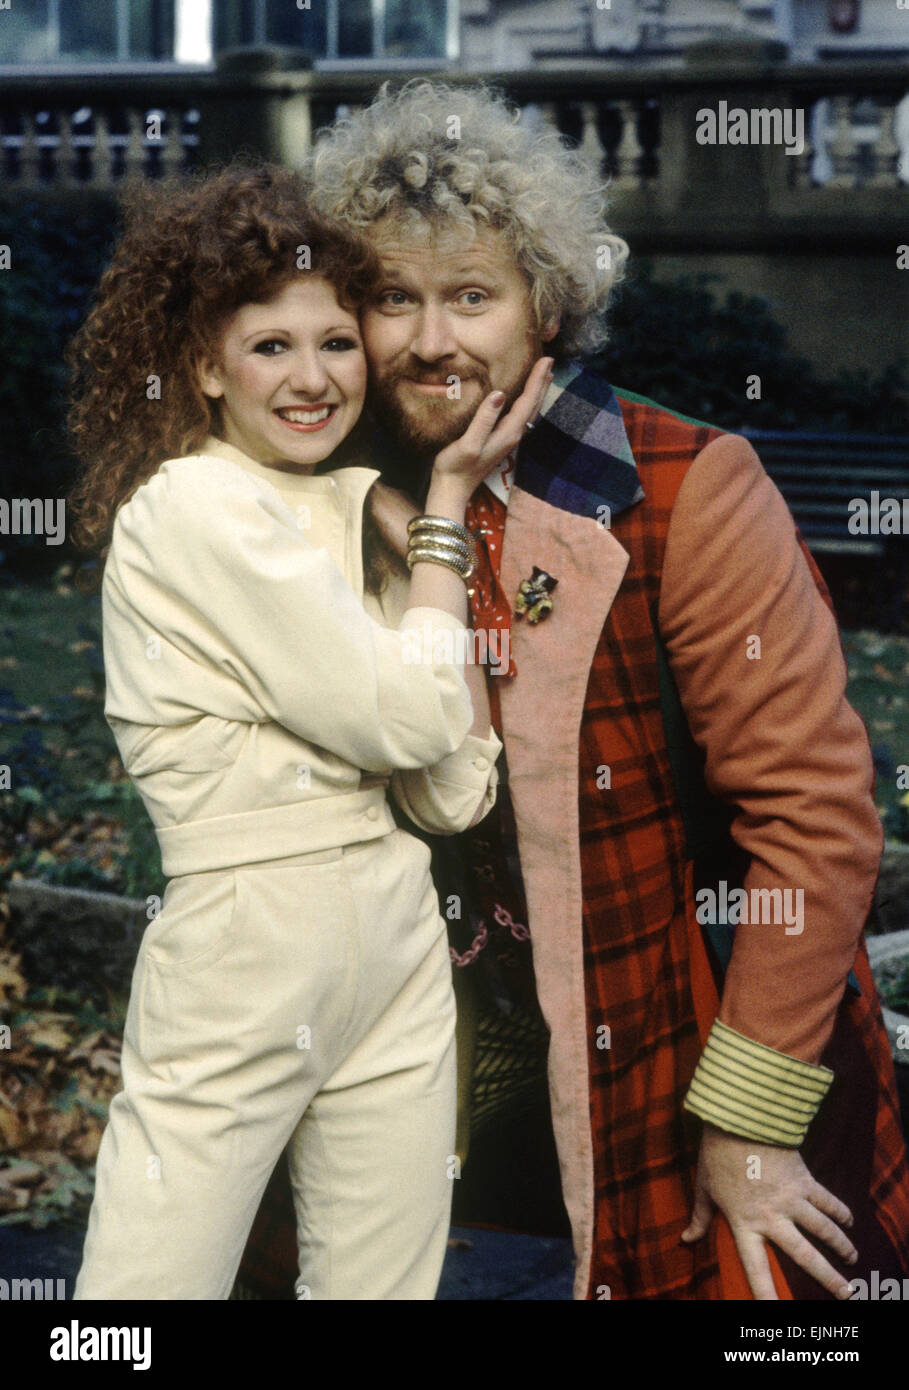 Actor Colin Baker, who plays Doctor Who in the BBC science fiction programme, photographed with his new assistant Bonnie Langford during filming of the The Trial of a Time Lord. Langford plays Melanie, a 21 year old computer programmer. . 20th October 1986. Stock Photo